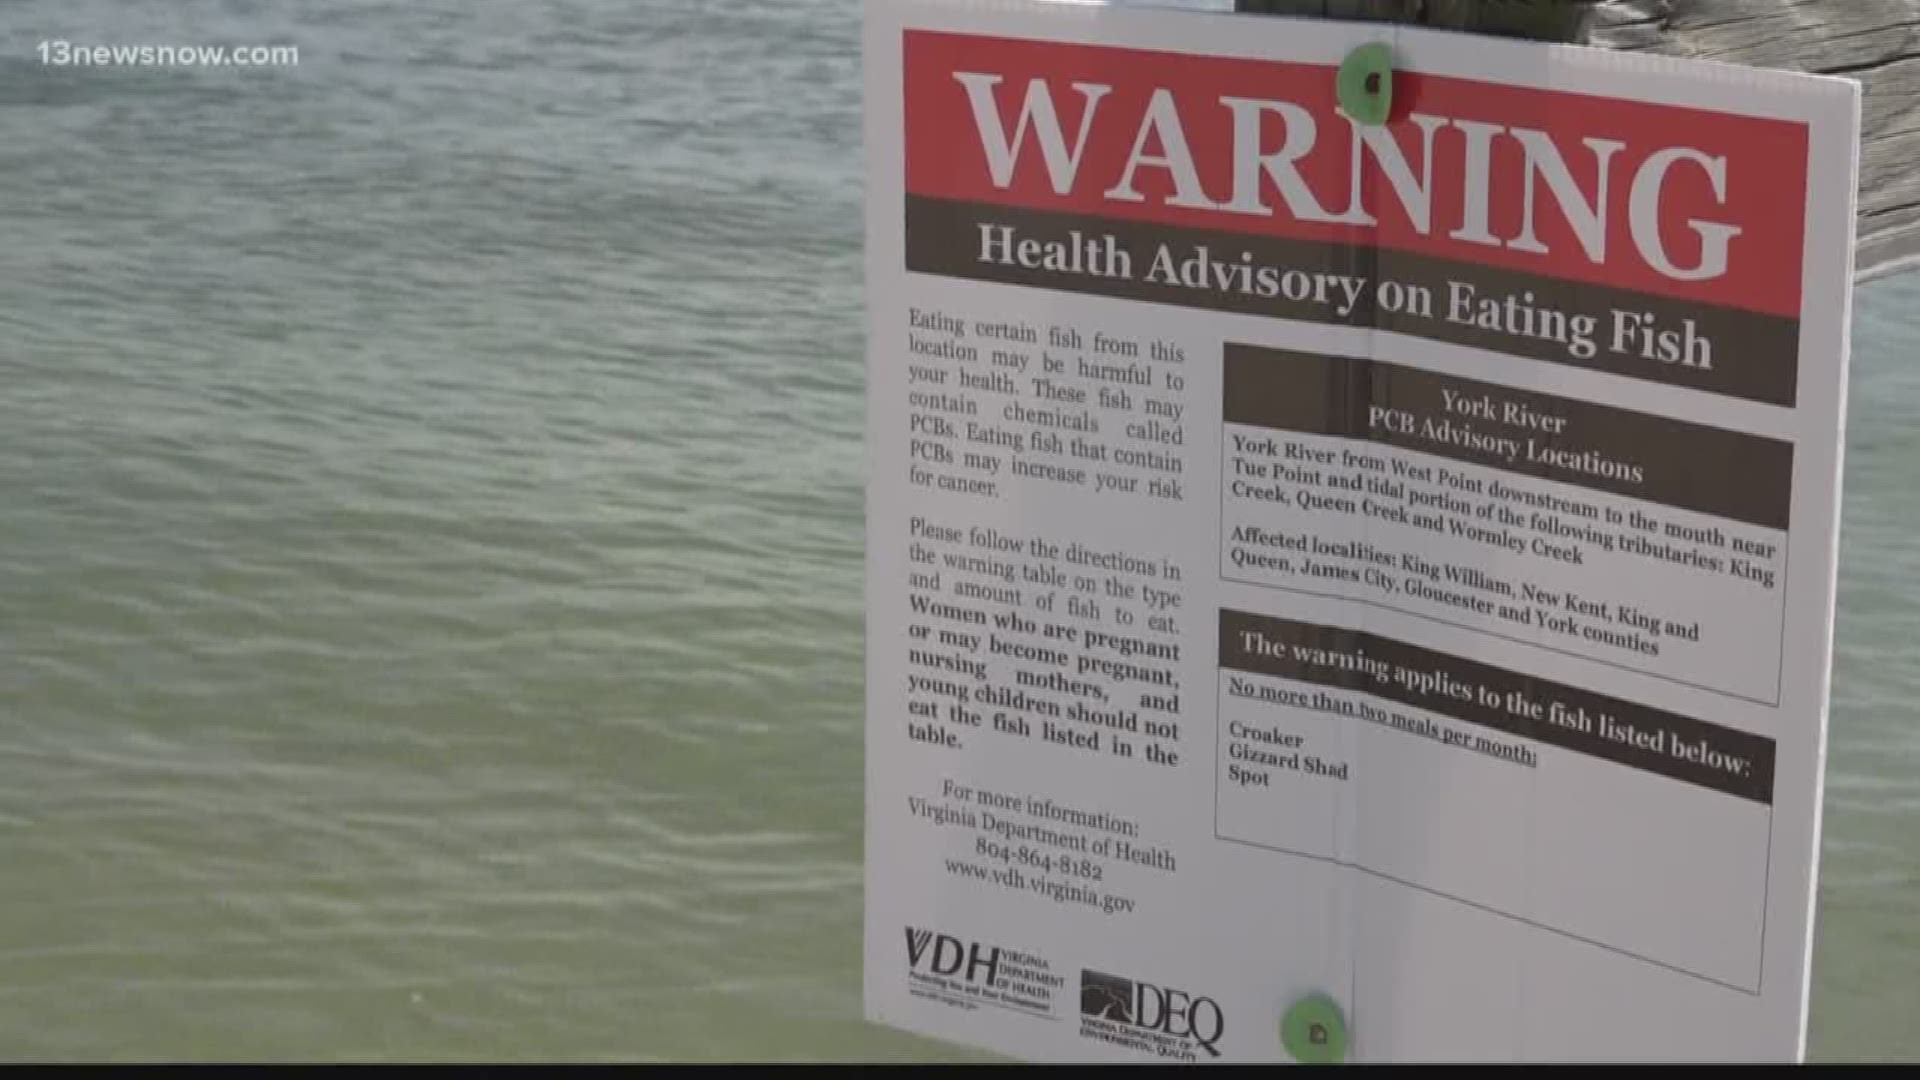 The Virginia Department of Health warns eating fish caught along the York River could make you very sick!